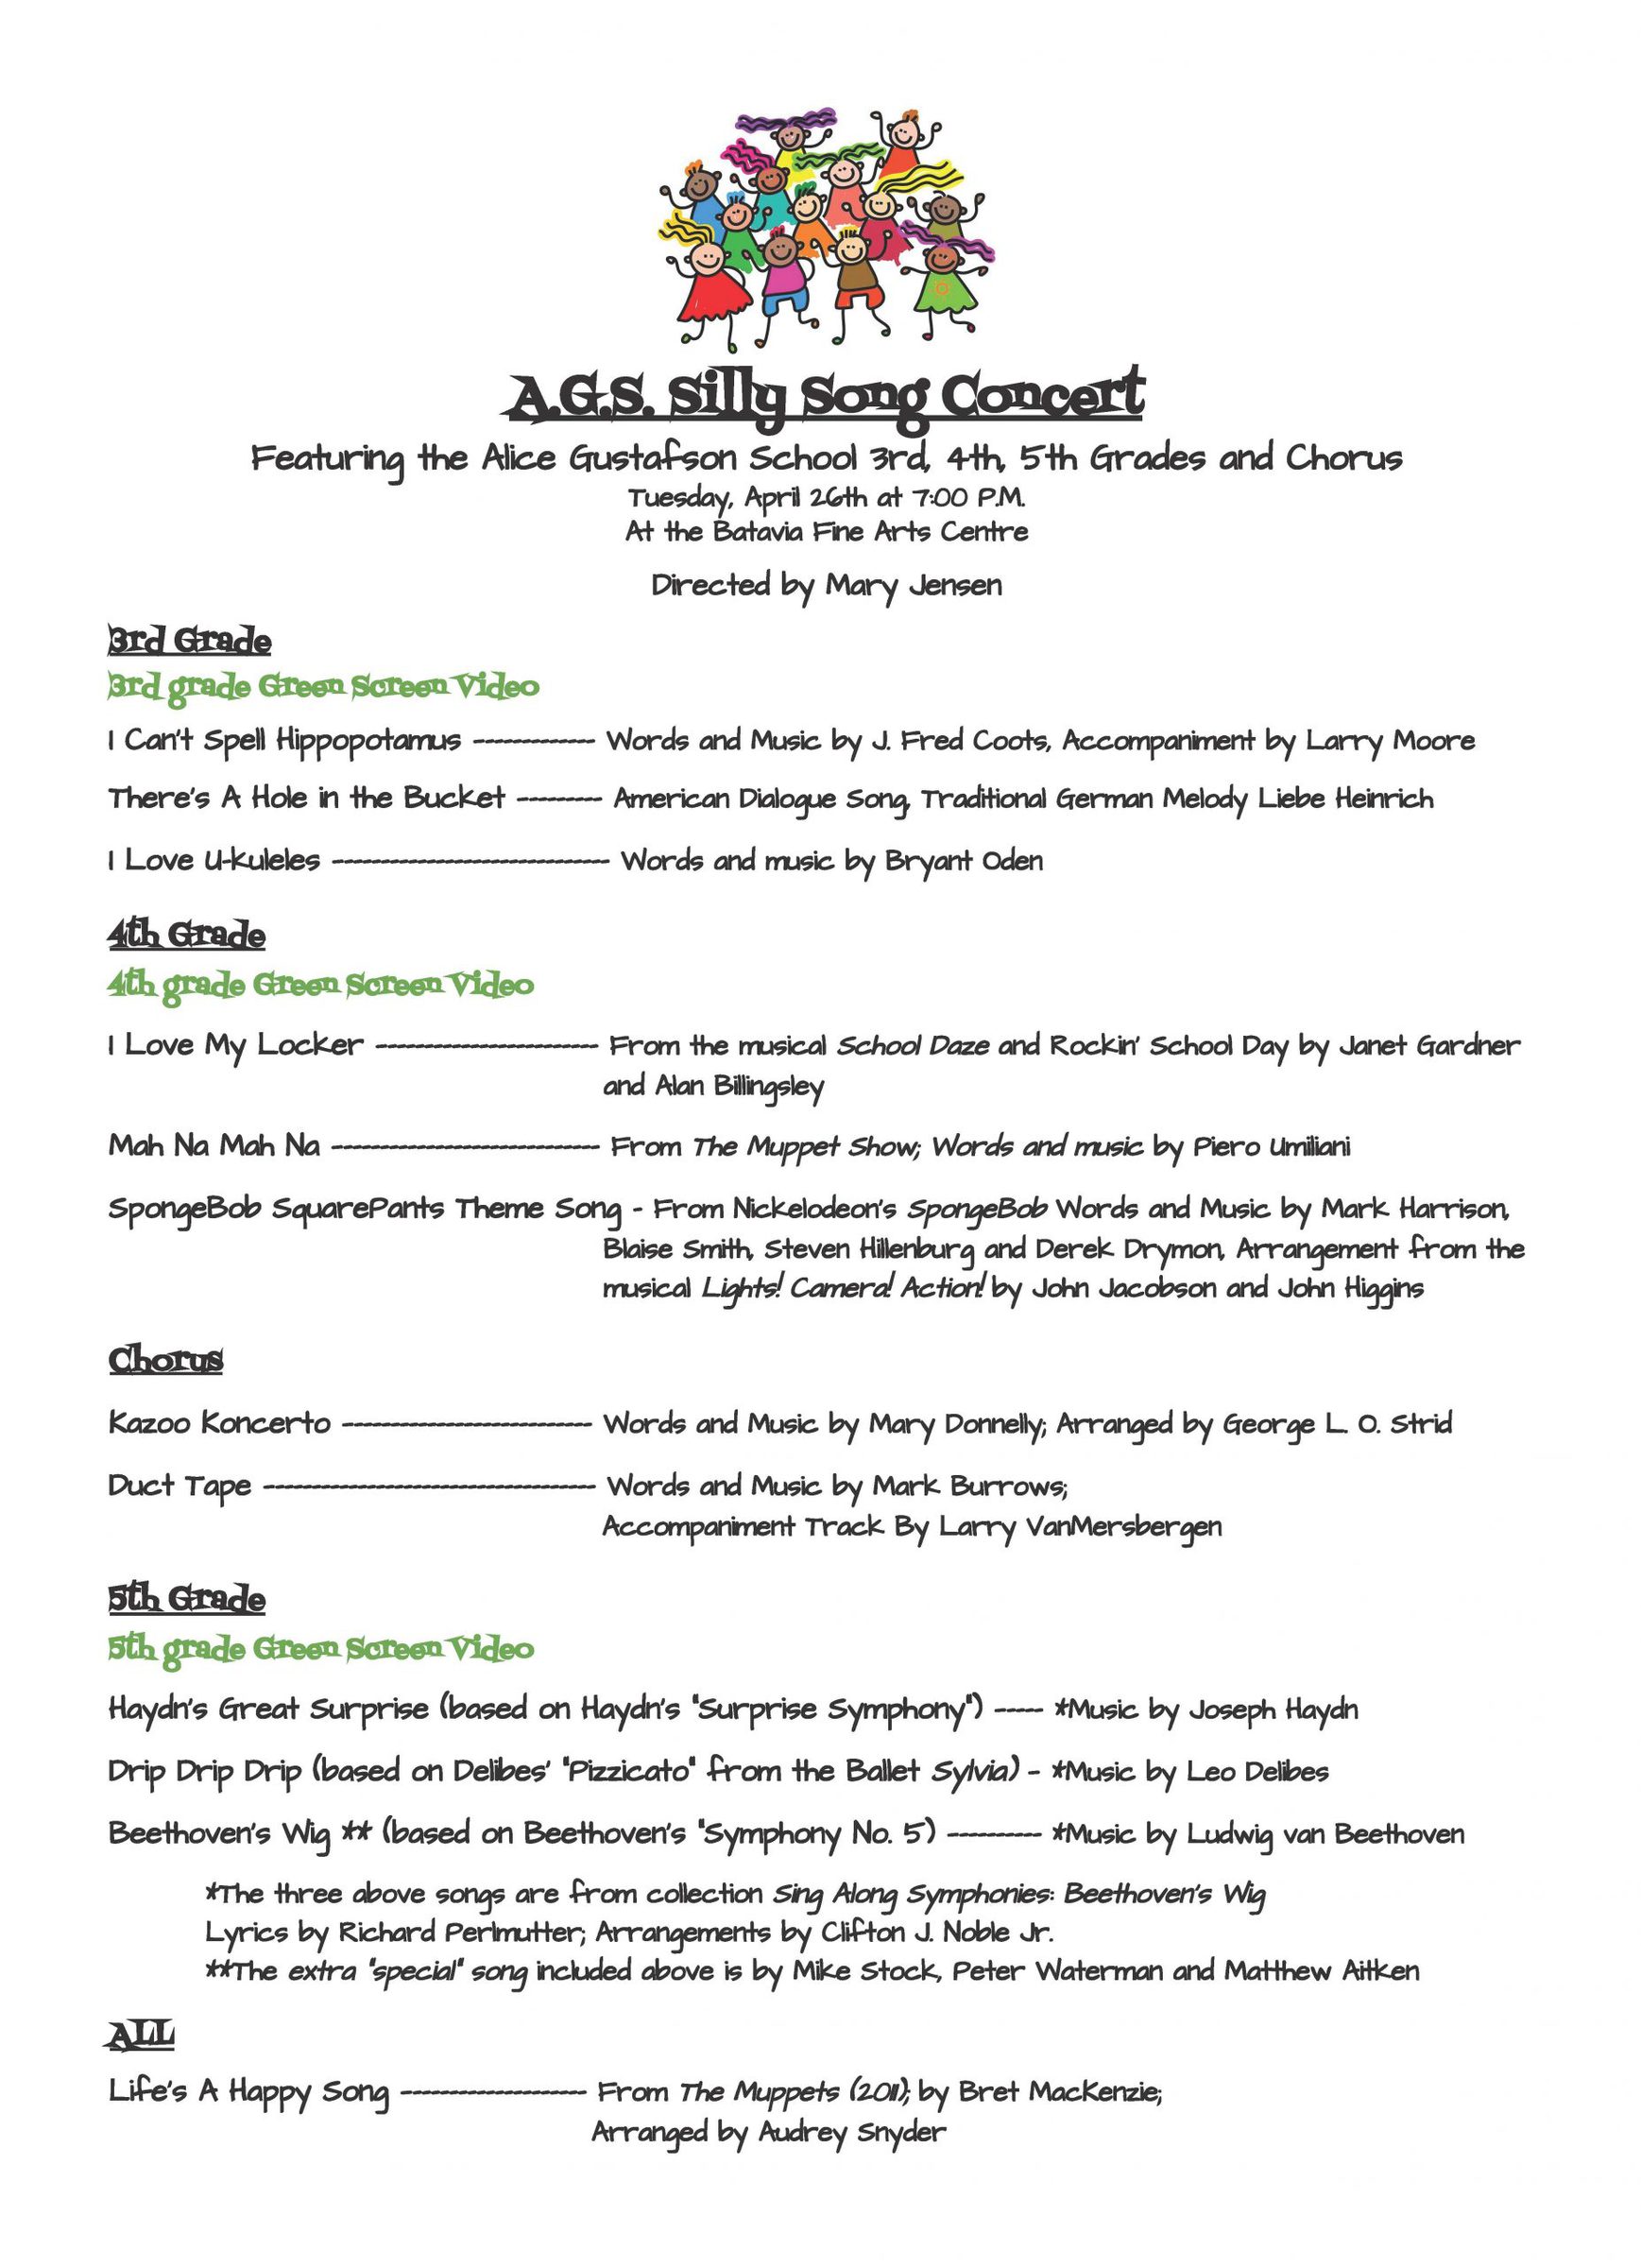 AGS Silly Song Concert Program